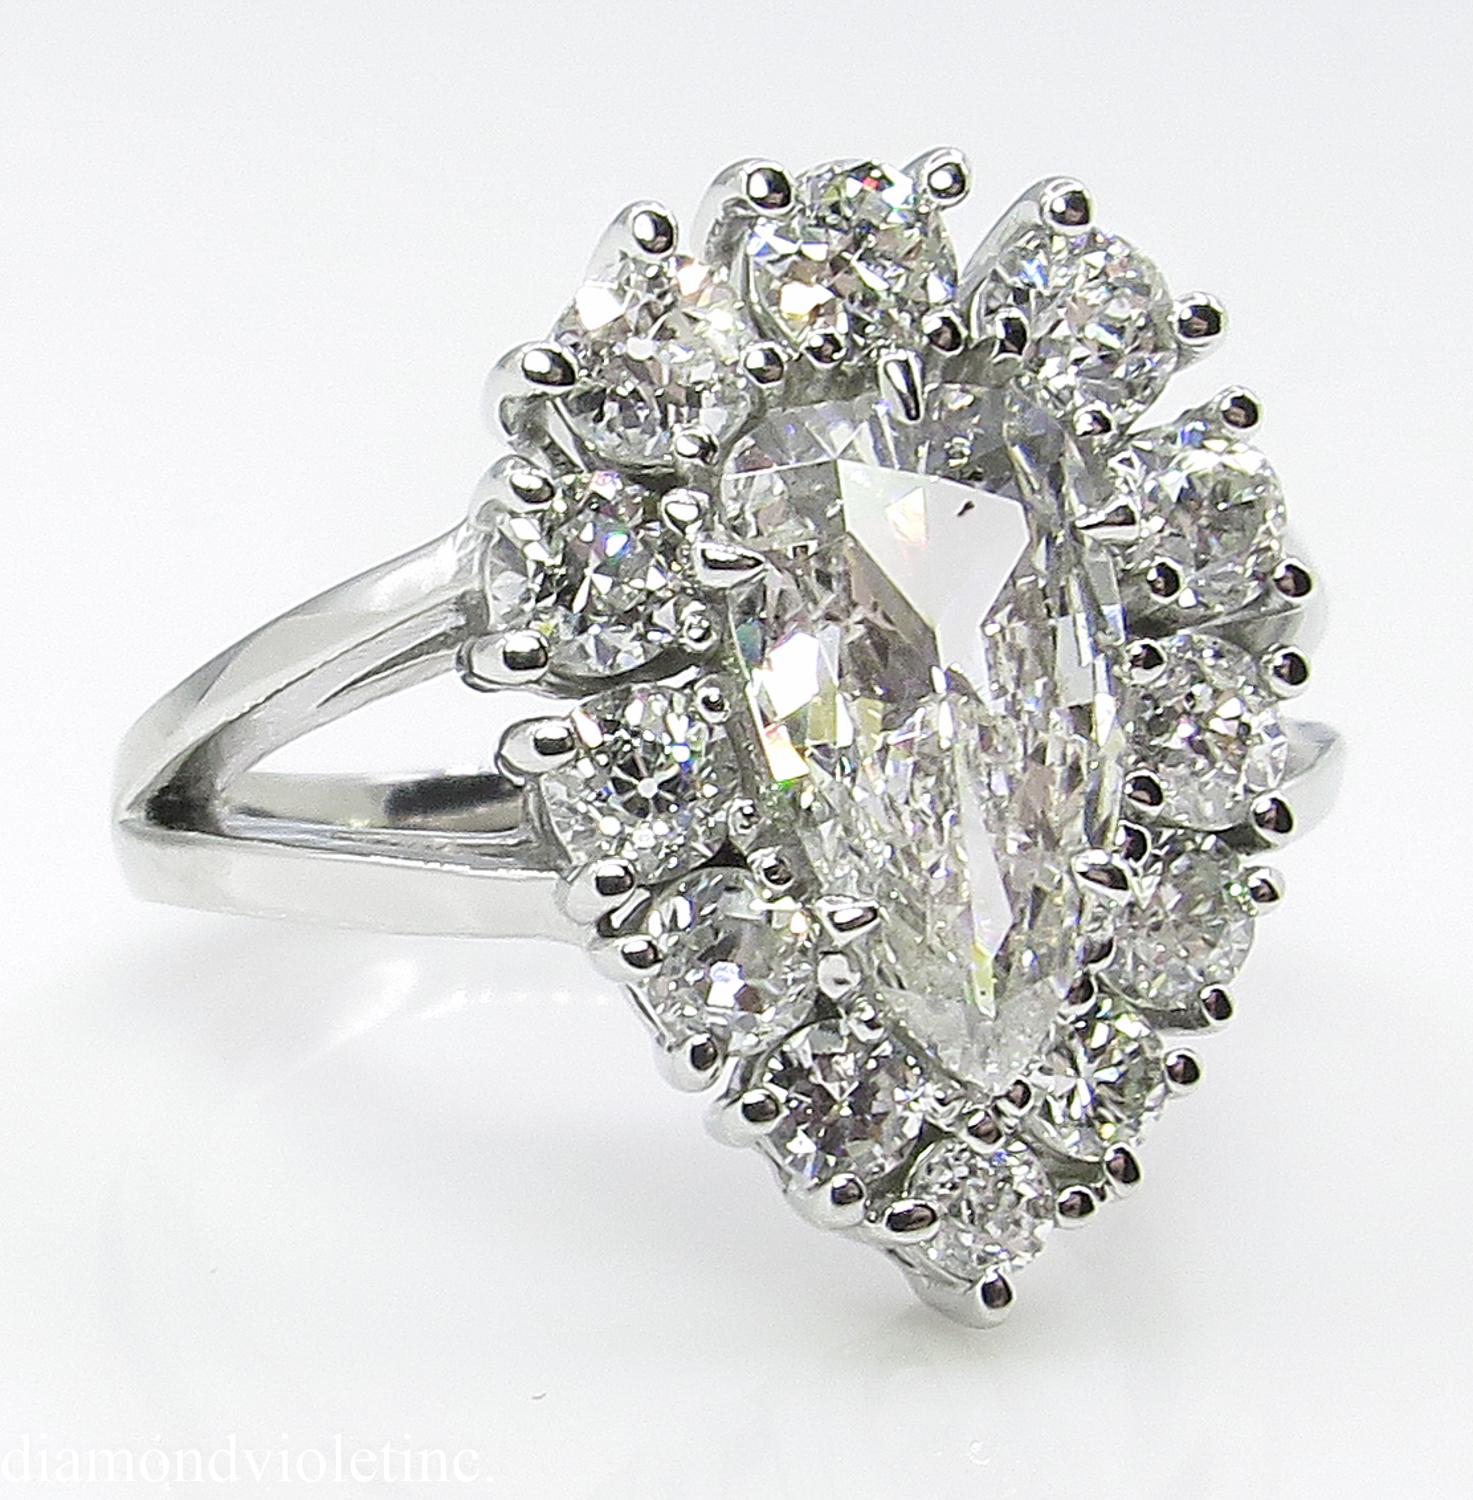 This breathtakingly beautiful and Delicate Vintage Diamond Cluster Engagement Platinum Ring (stamped), the Center Diamond is 1.06ct Pear Center Diamond in I-J color and SI3 clarity (Near colorless and eye clear), EGL USA Certified.
It is surrounded